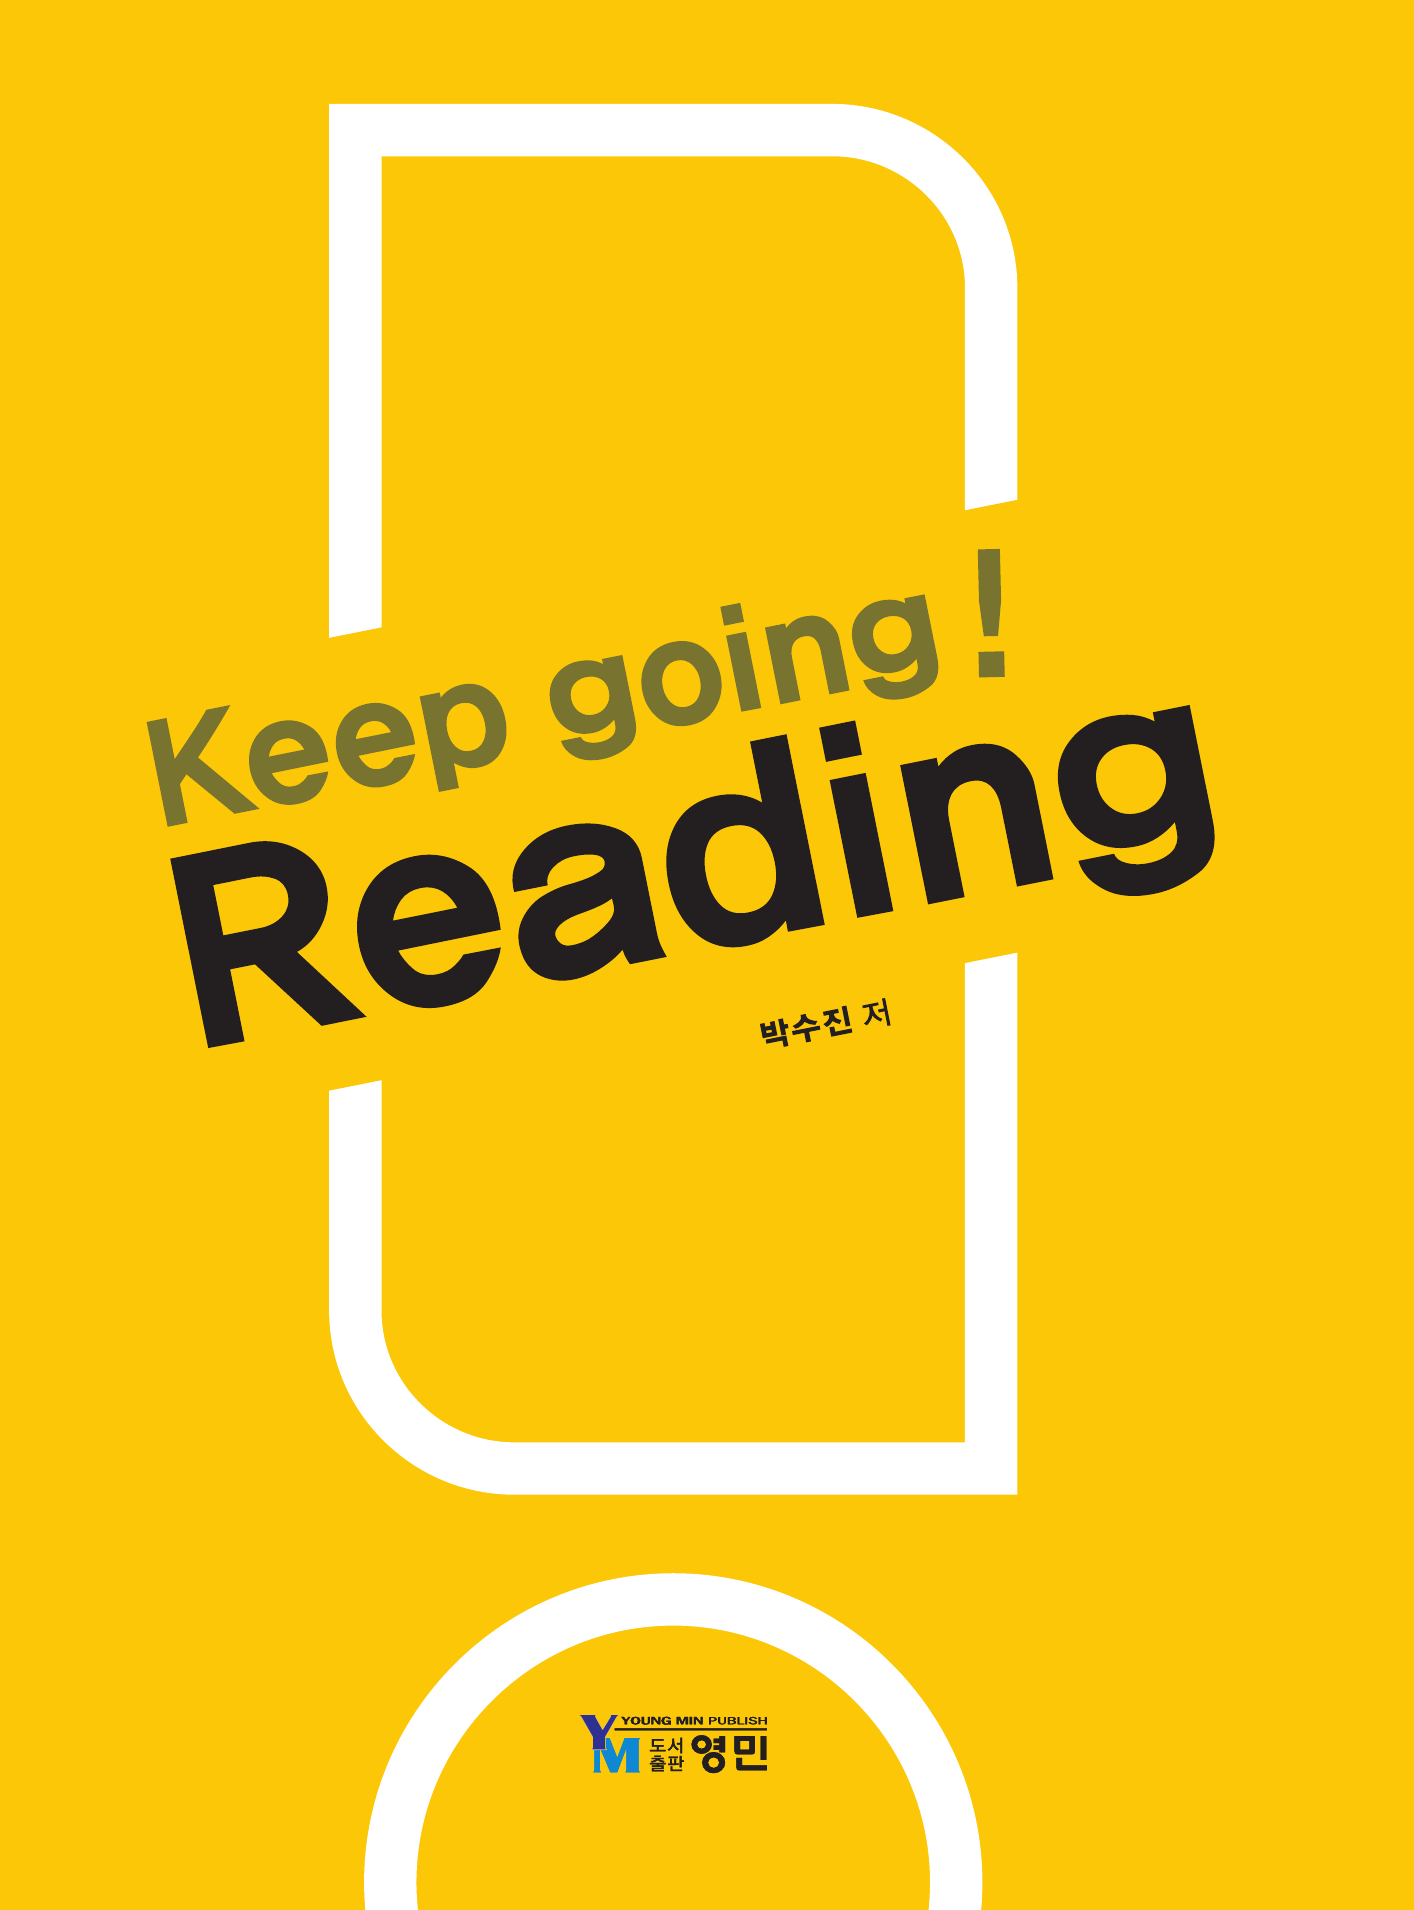 Keep going! Reading